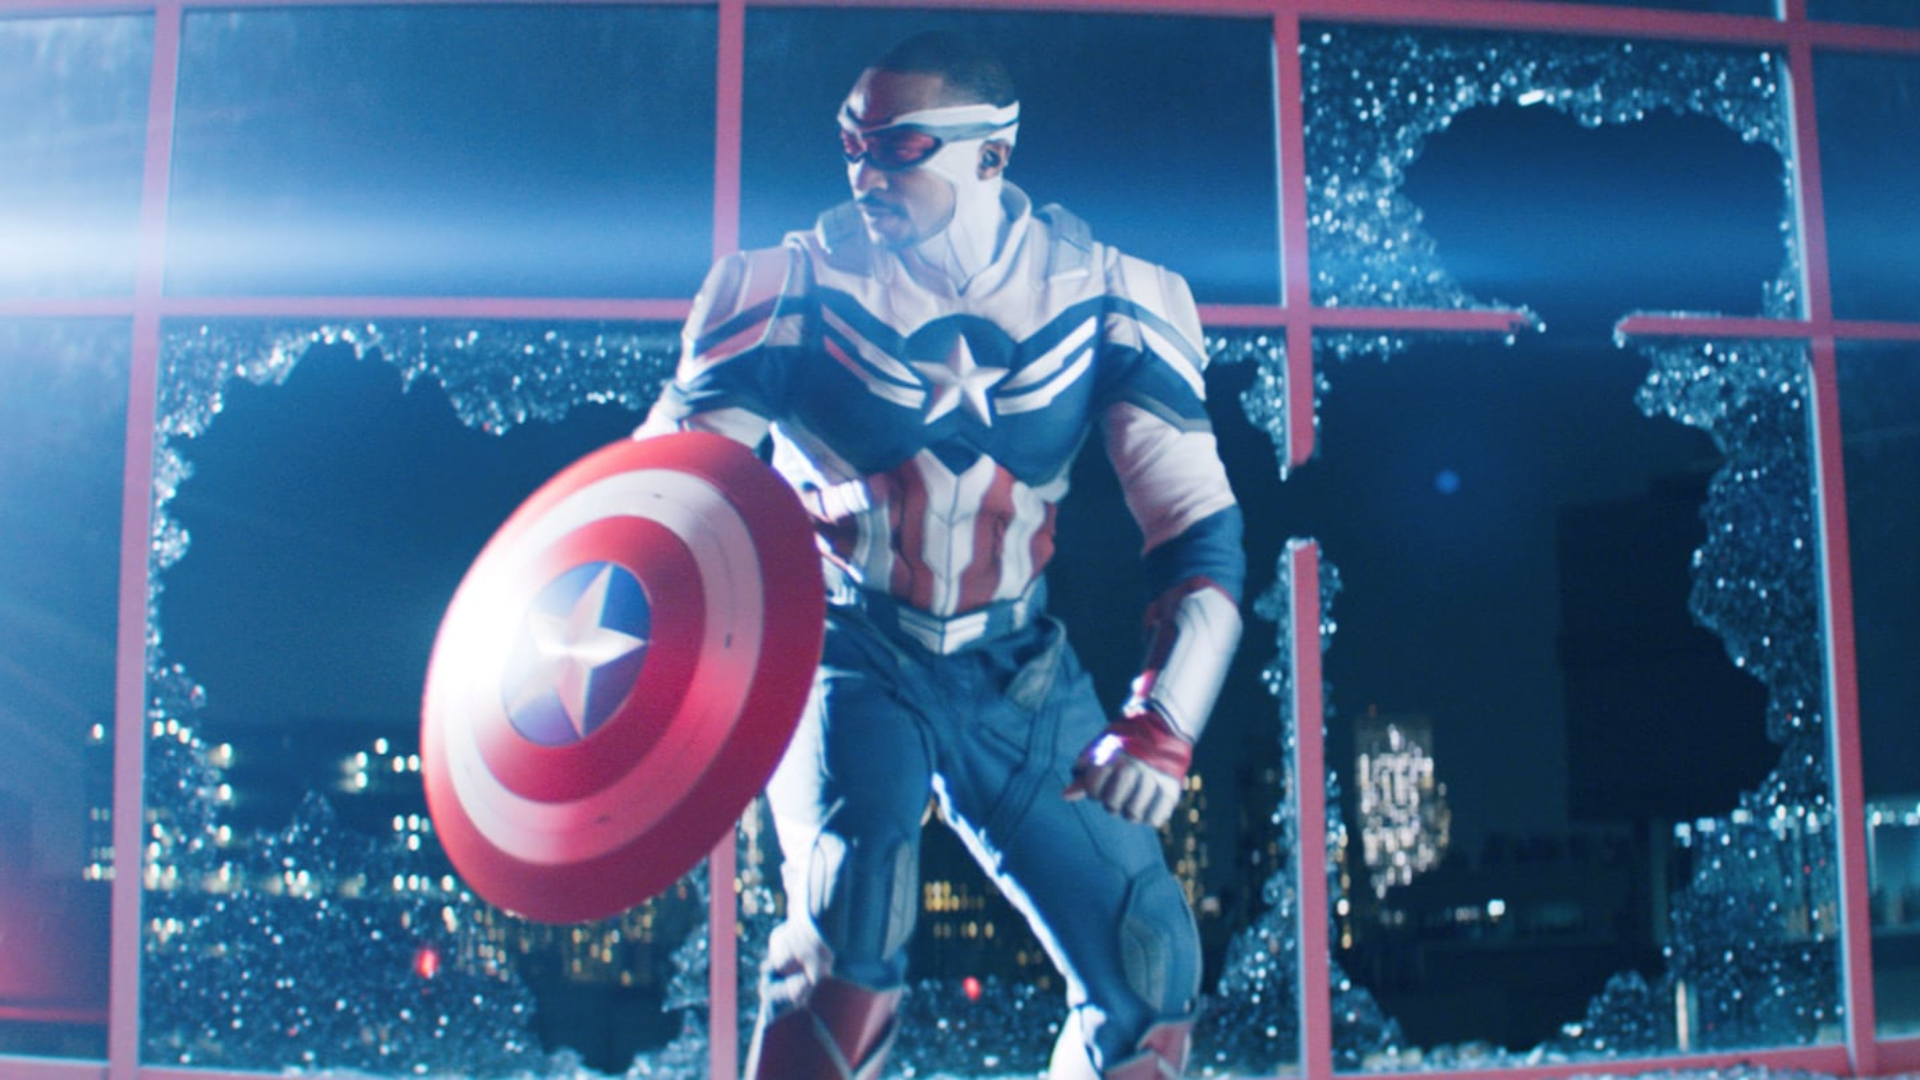 Captain America 4 star says the Marvel film will be a